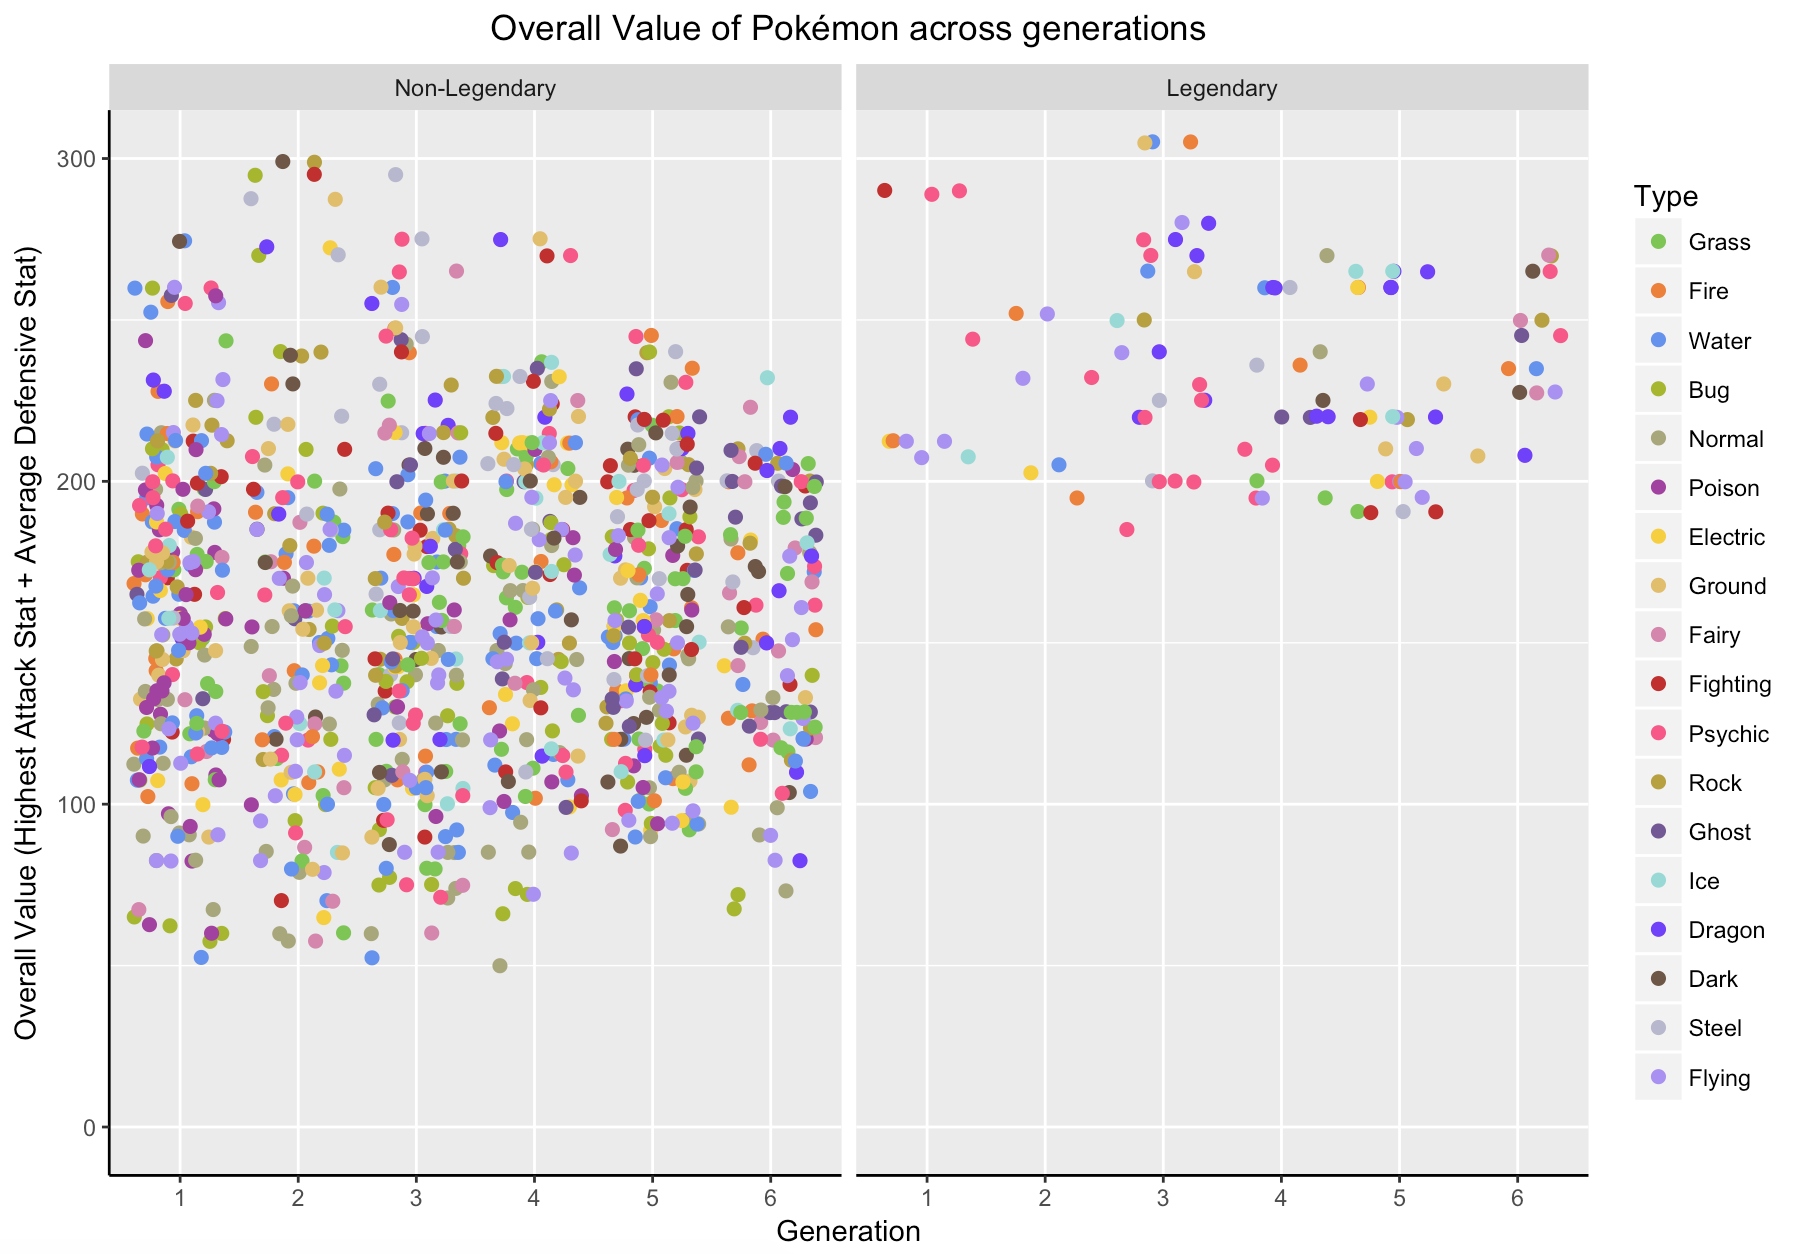 Overall Value across Generations by Type